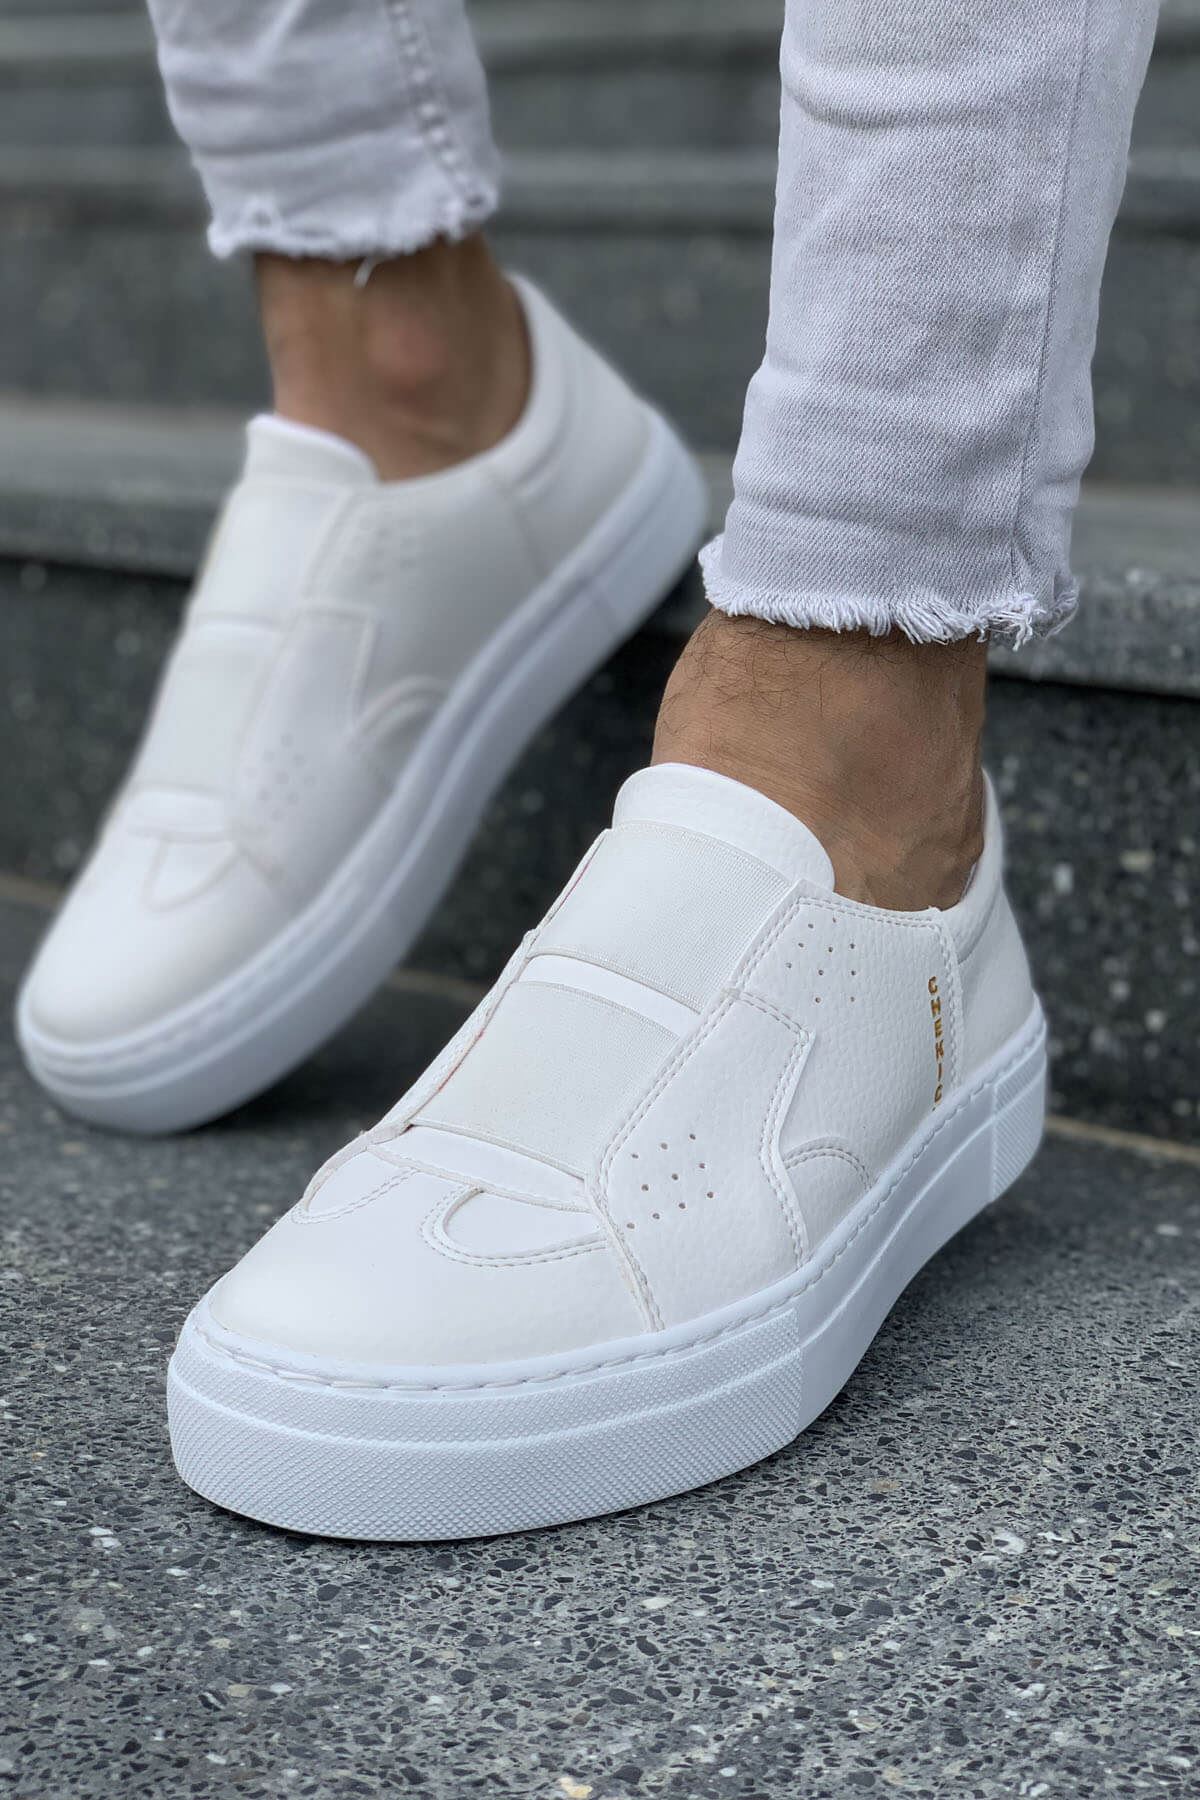 Chekich Men's & Women's Shoes White Color Non Leather Elastic Band Closure Spring and Autumn Season Casual Sport Solid Unisex Original Vulcanized Air Breathable Lightweight Sneakers Comfortable Slip On Suits CH033